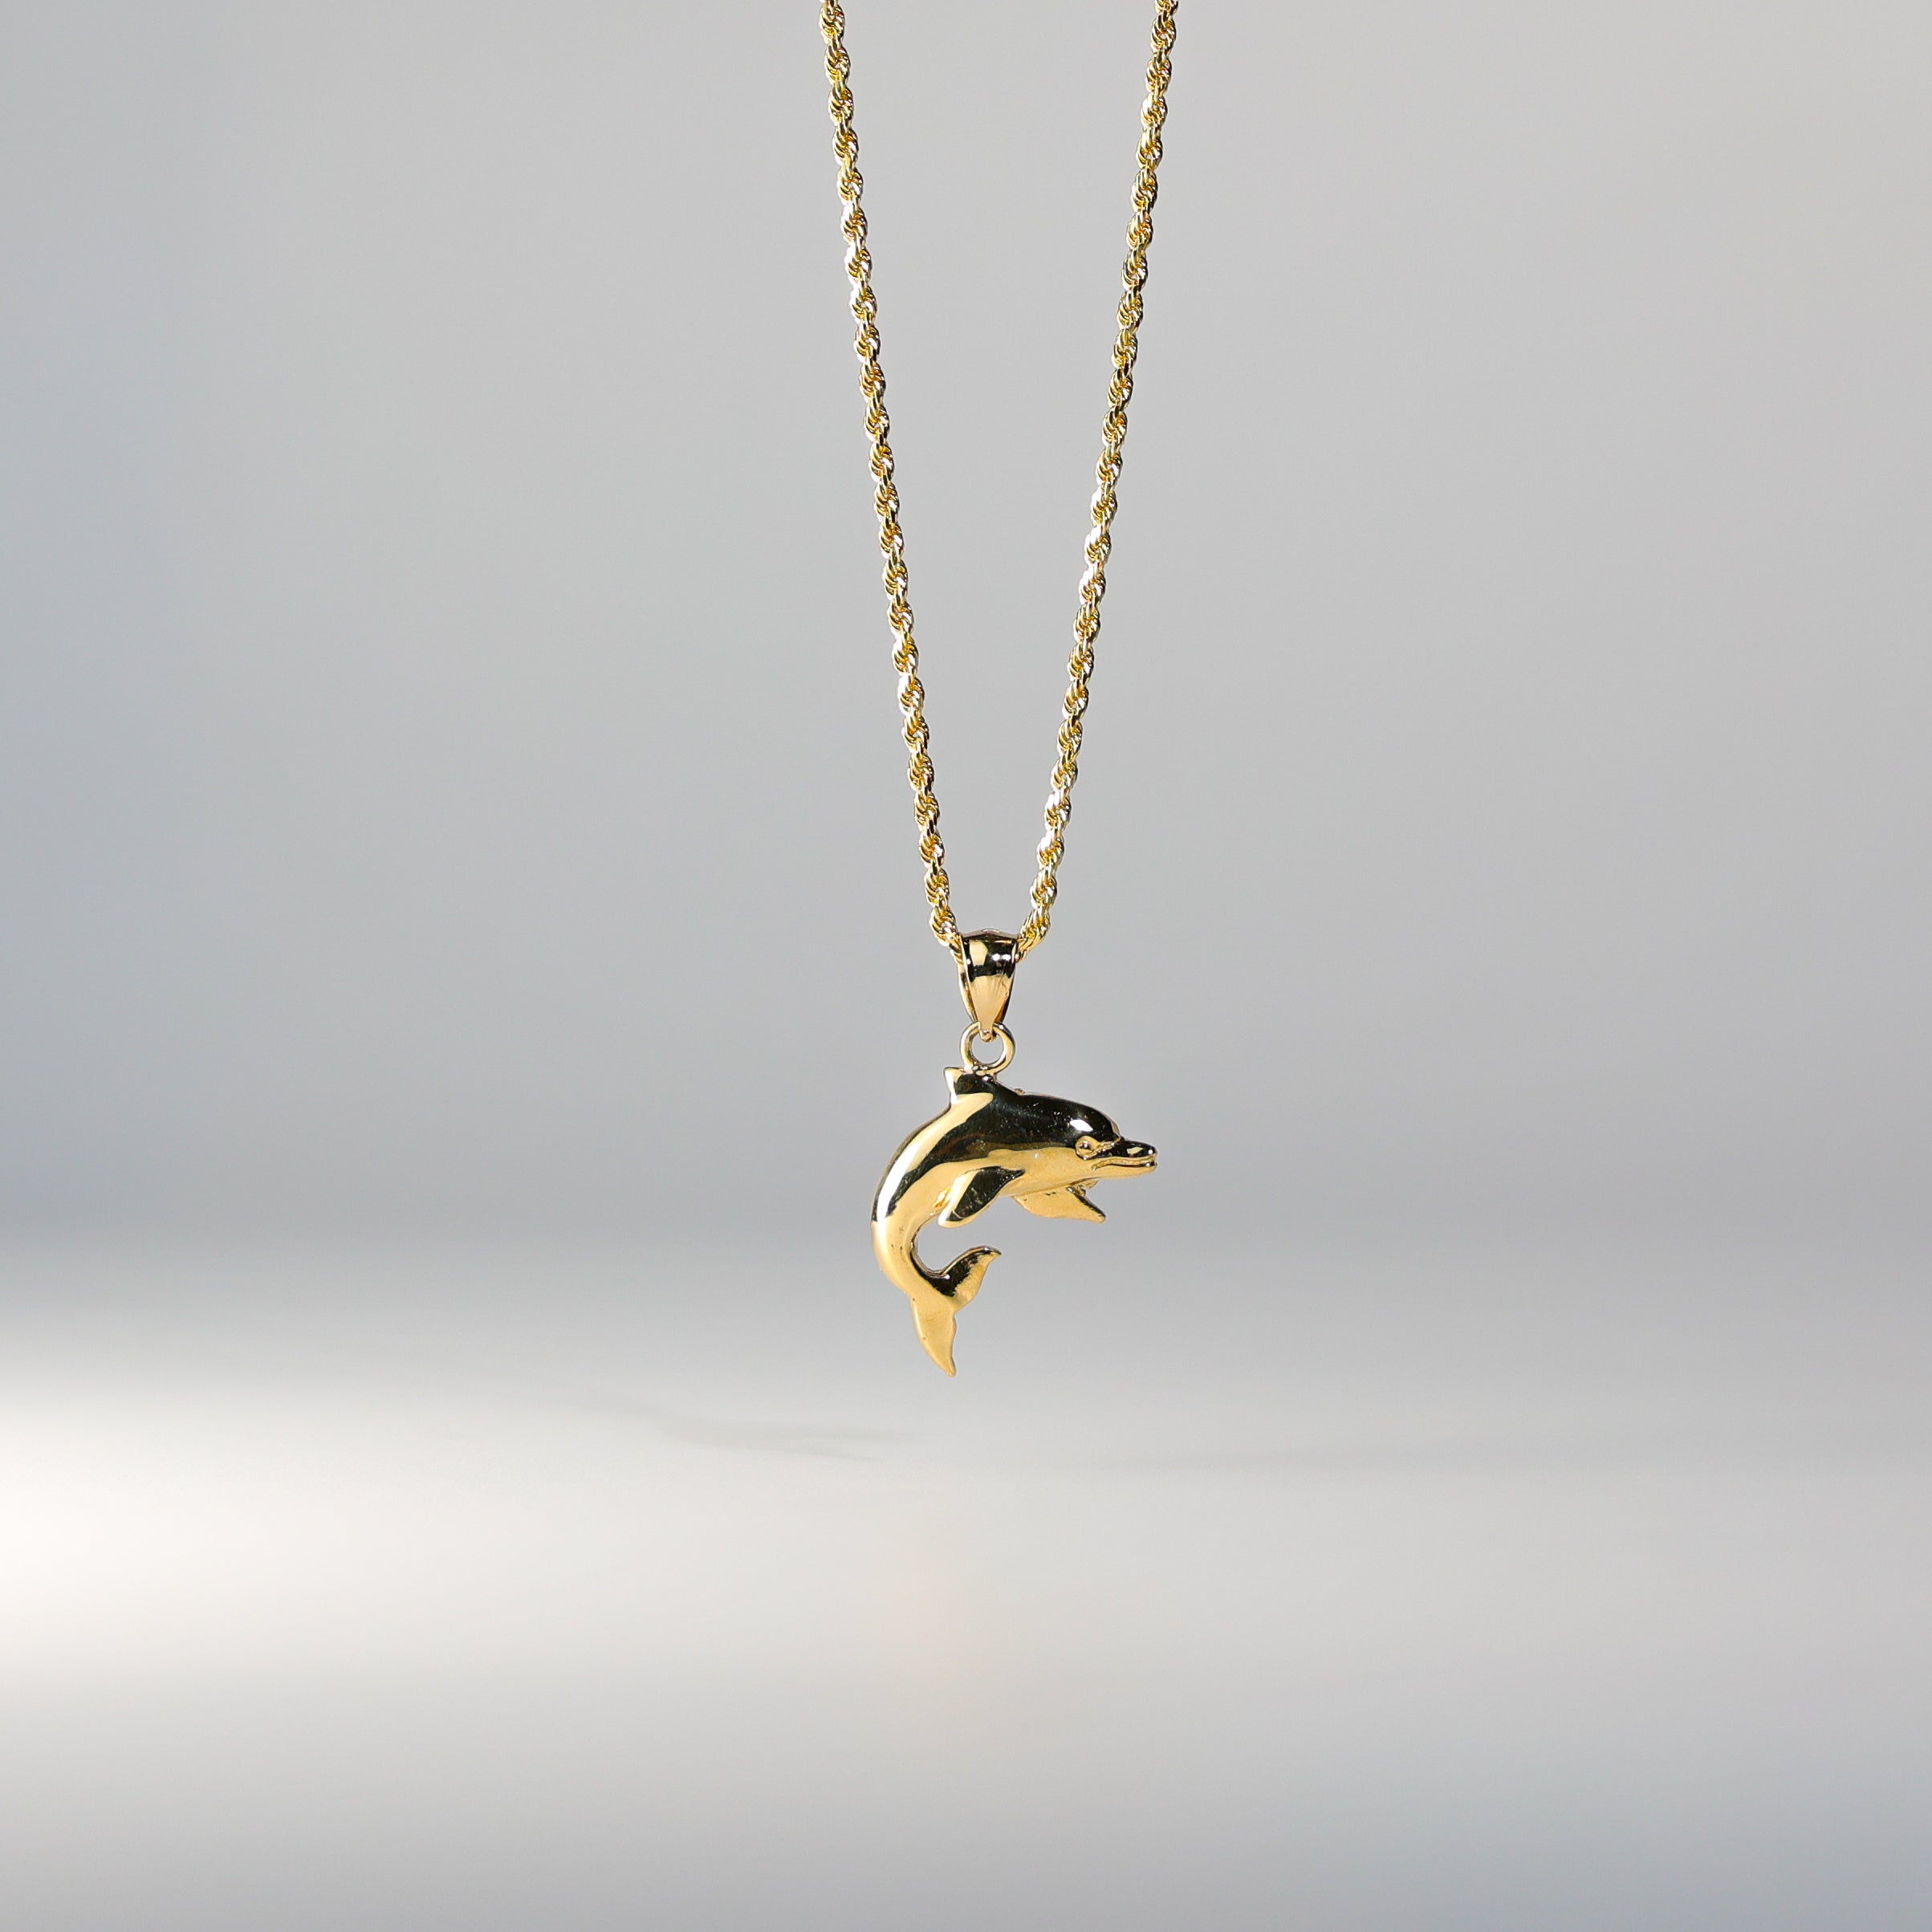 Gold Dolphin Pendant Model-1670 - Charlie & Co. Jewelry